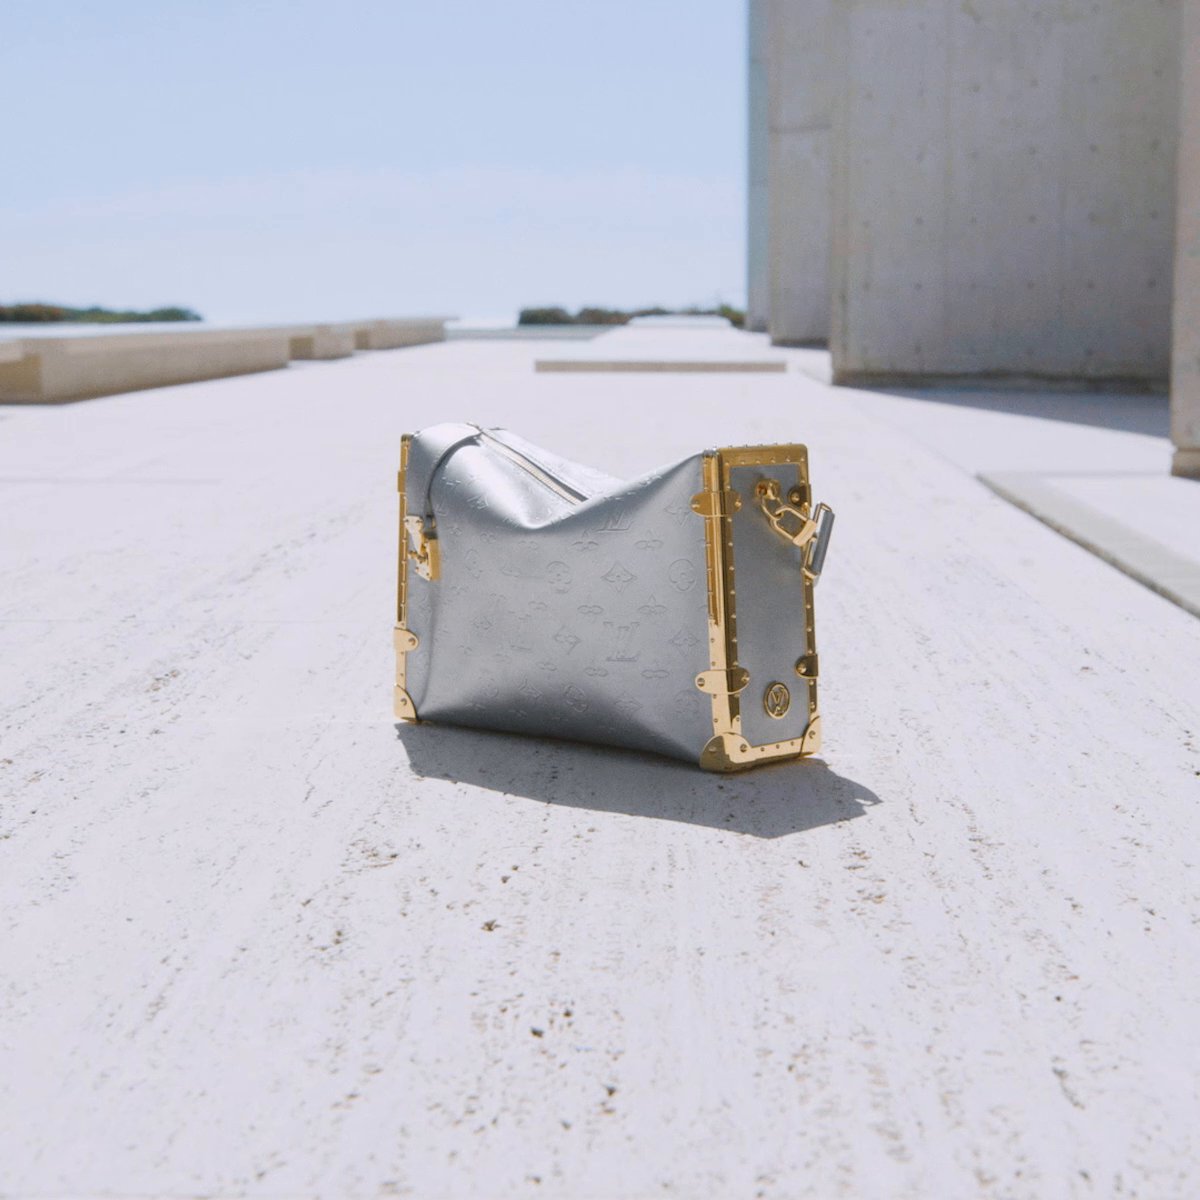 Louis Vuitton on X: #LVCruise Strong angles. A new bag from  @TWNGhesquiere's upcoming #LouisVuitton collection incorporates  motorsport-inspired padding in a range of metallic hues. Watch the fashion  show live on May 12th